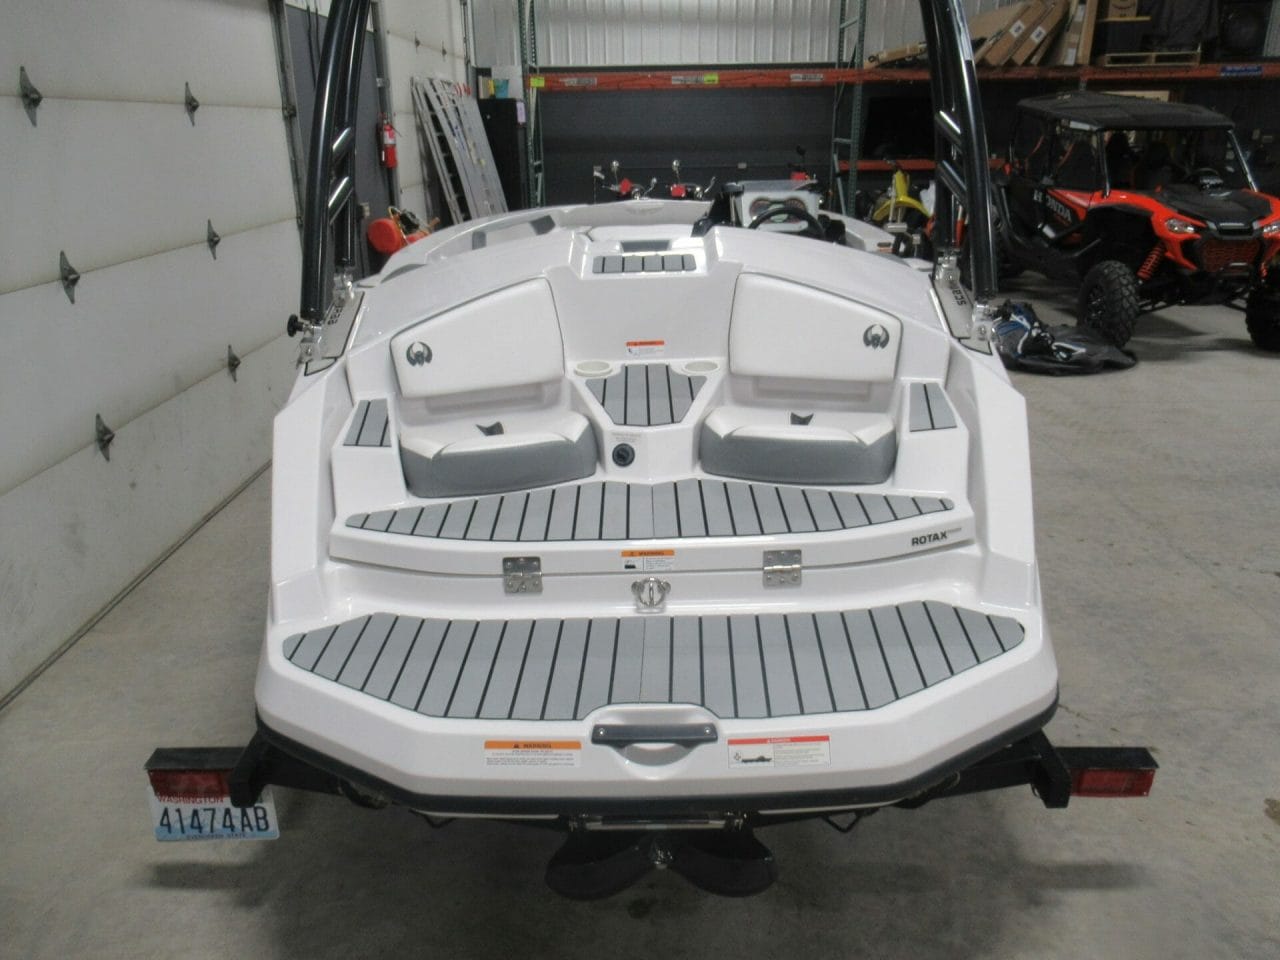 2019 Scarab 165 Jet Boat * Like New Condition * 